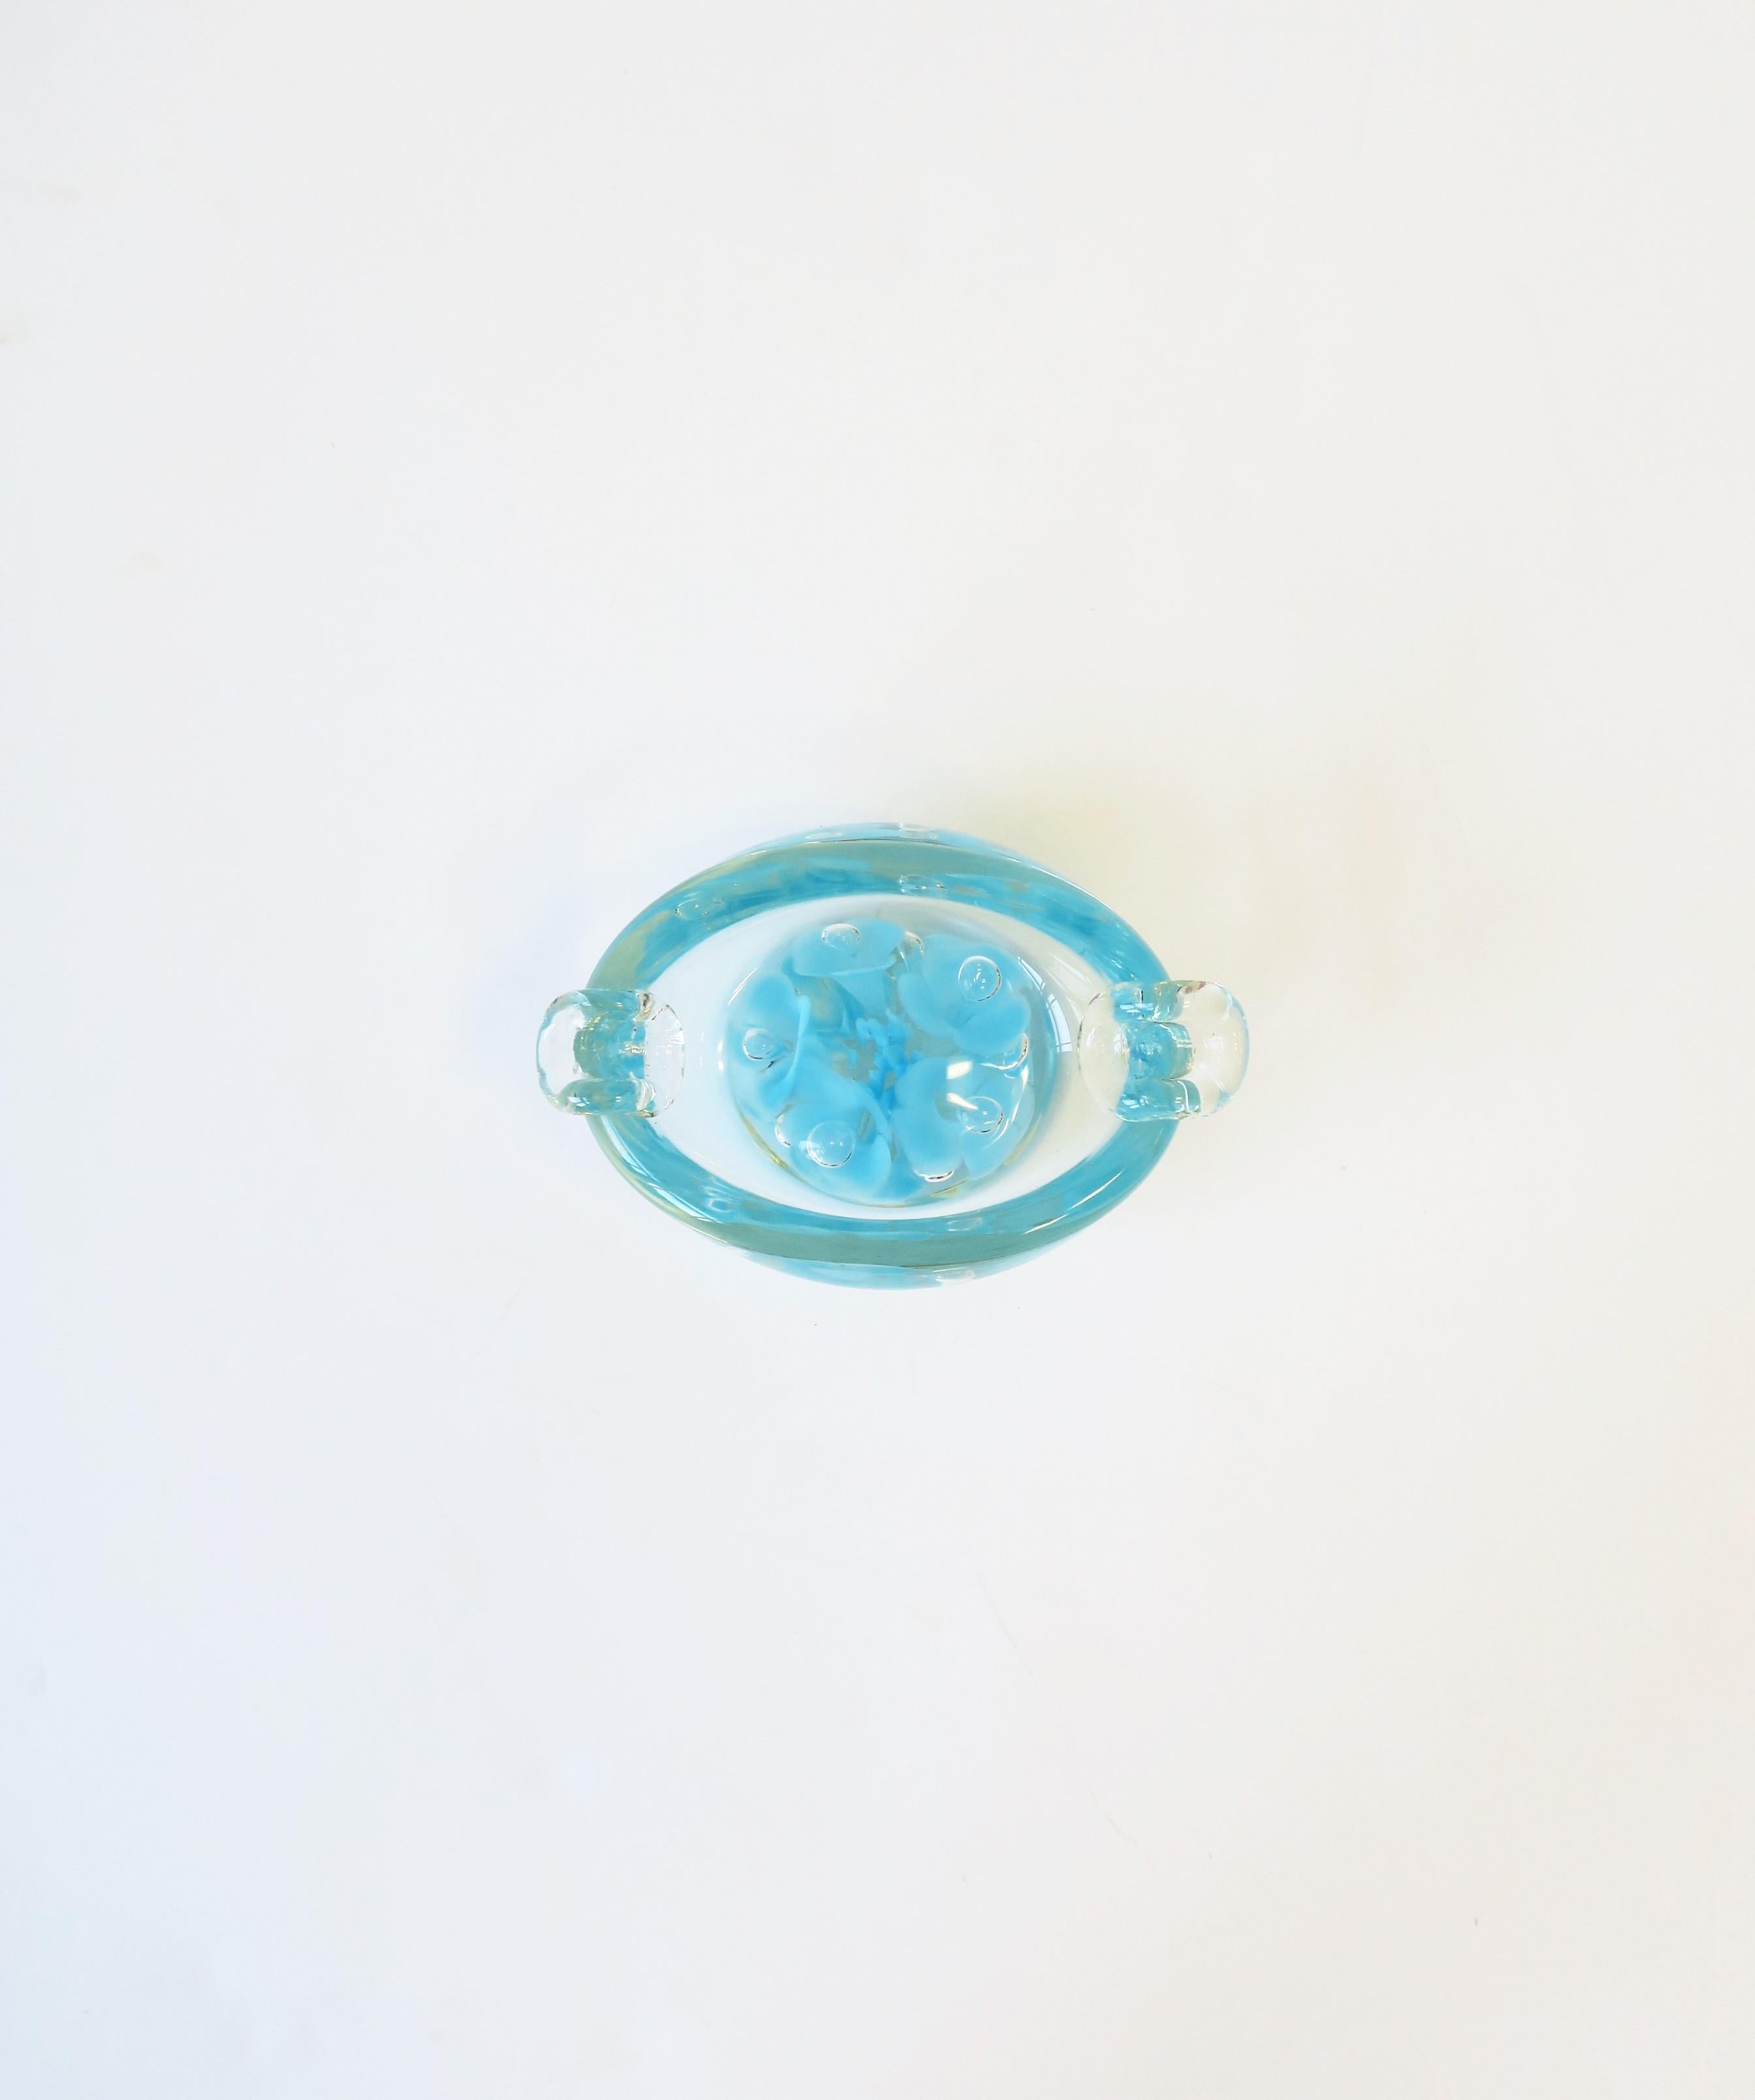 A small and substantial Italian Murano sky blue art glass ashtray or bowl, circa late-20th century, Italy. Great as its intended use (ashtray), as a standalone piece, or to hold small items such as jewelry on a desk, vanity, nightstand, dresser,